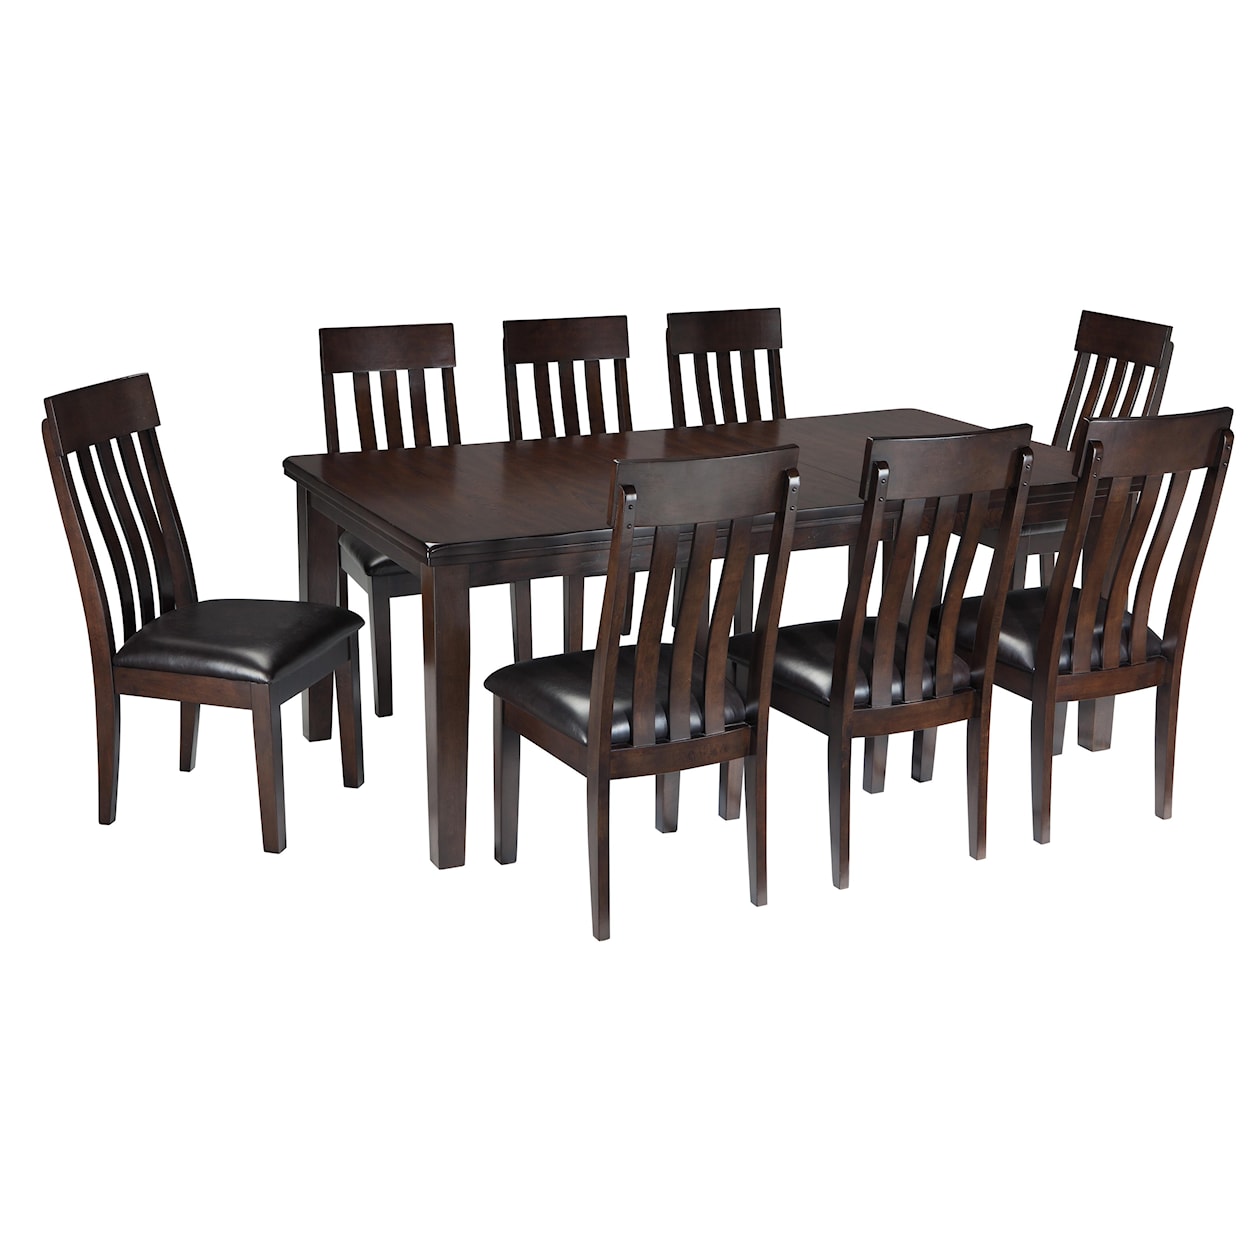 Signature Design by Ashley Haddigan 9-Piece Dining Room Table & Side Chair Set